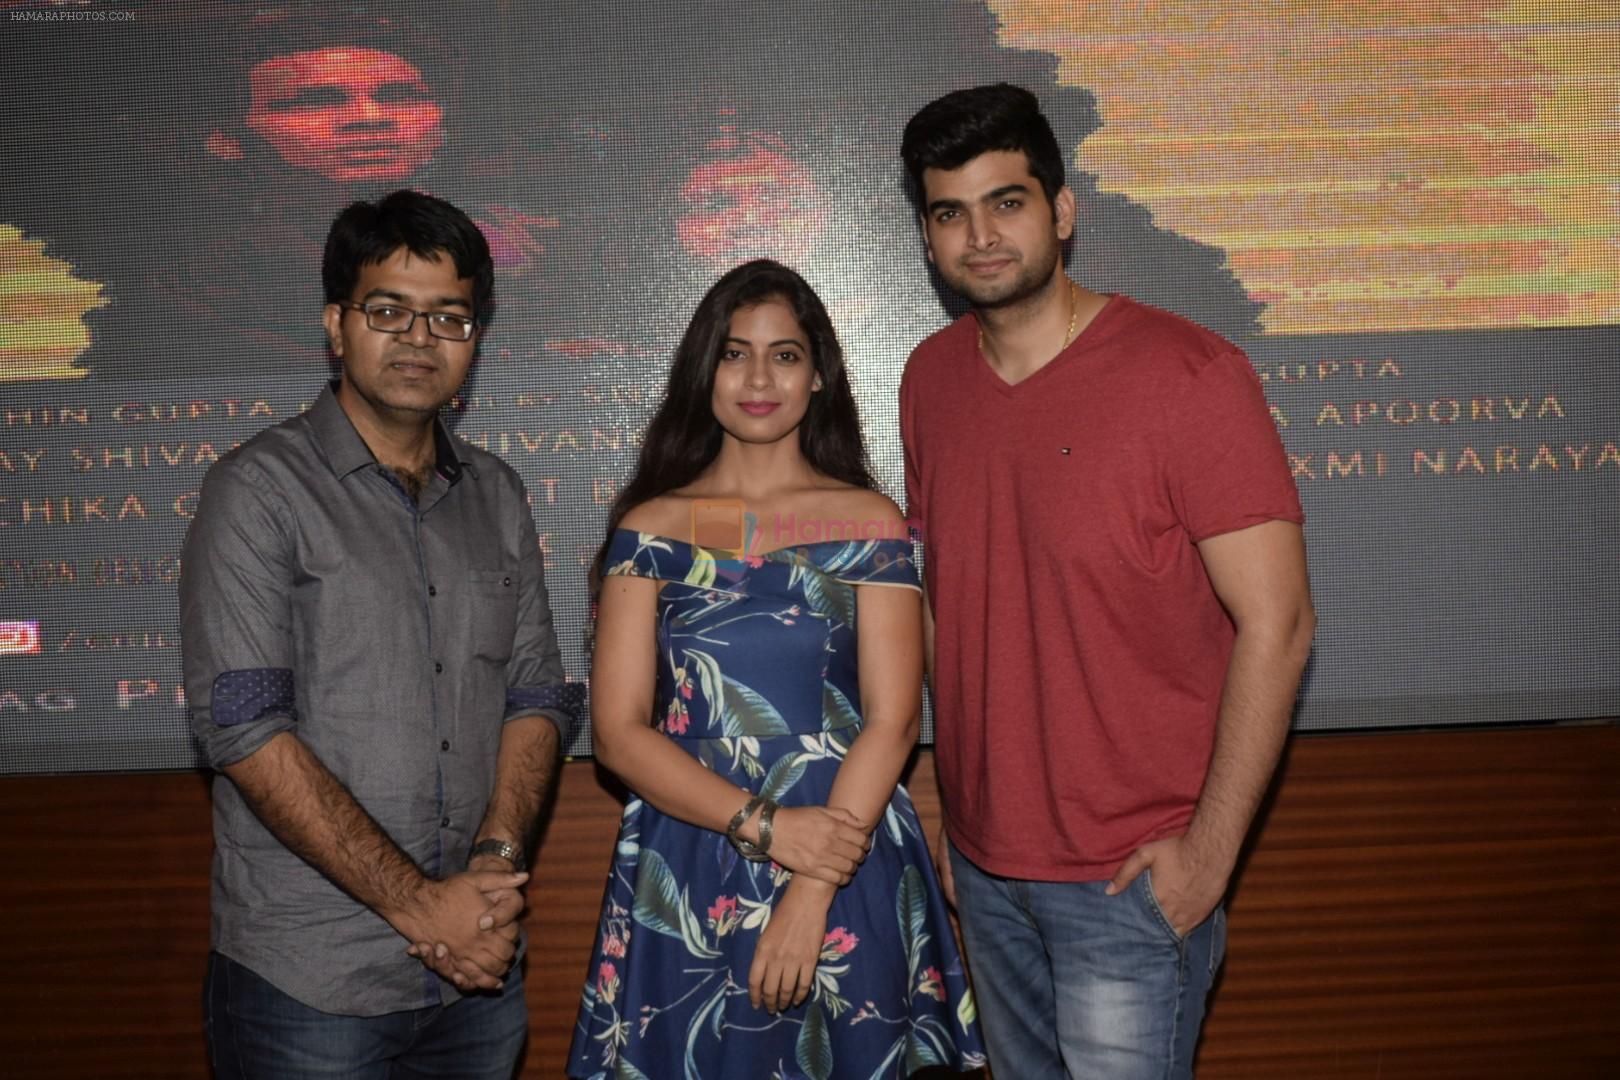 Anamika Shukla, Sumeet Kant Kaul, Sachin Gupta at the Trailer launch of film Paakhi at The View in Andheri on23rd July 2018